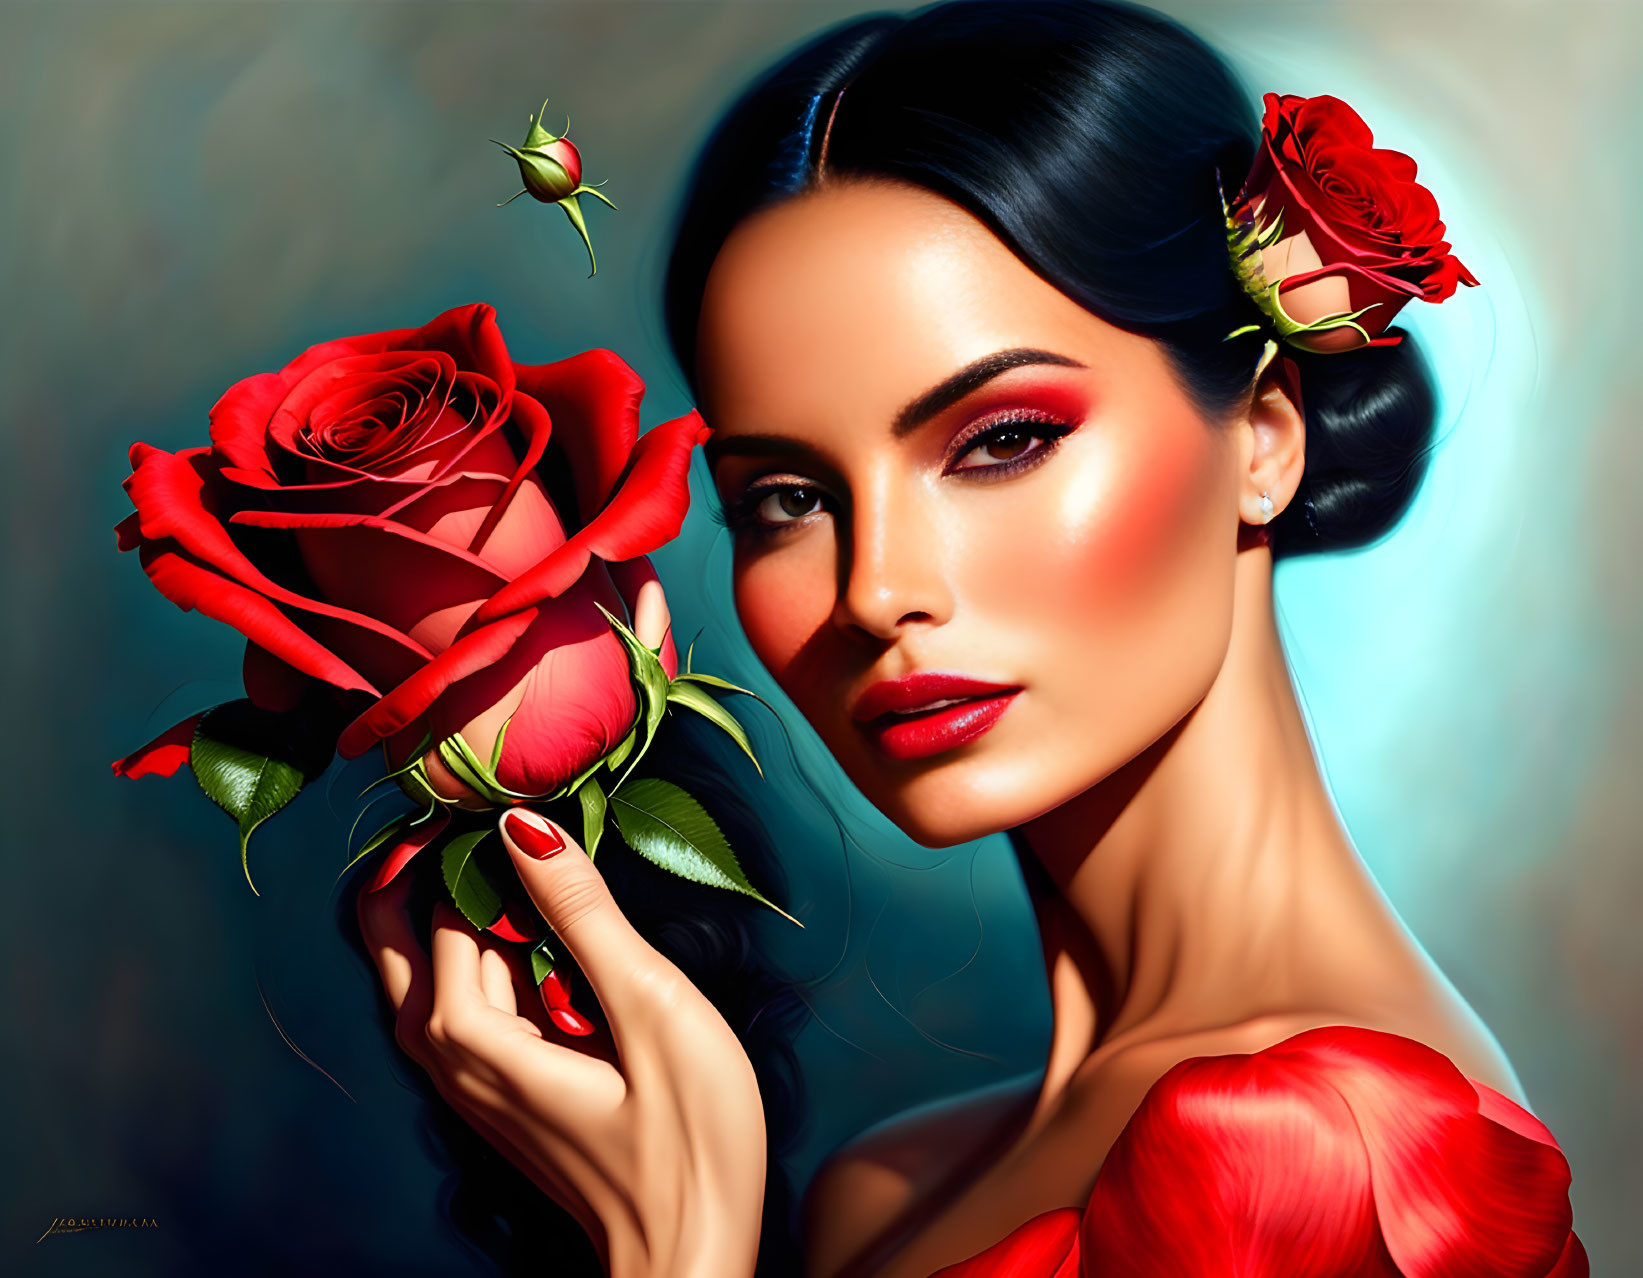 Portrait of Woman with Striking Makeup and Red Rose Bouquet